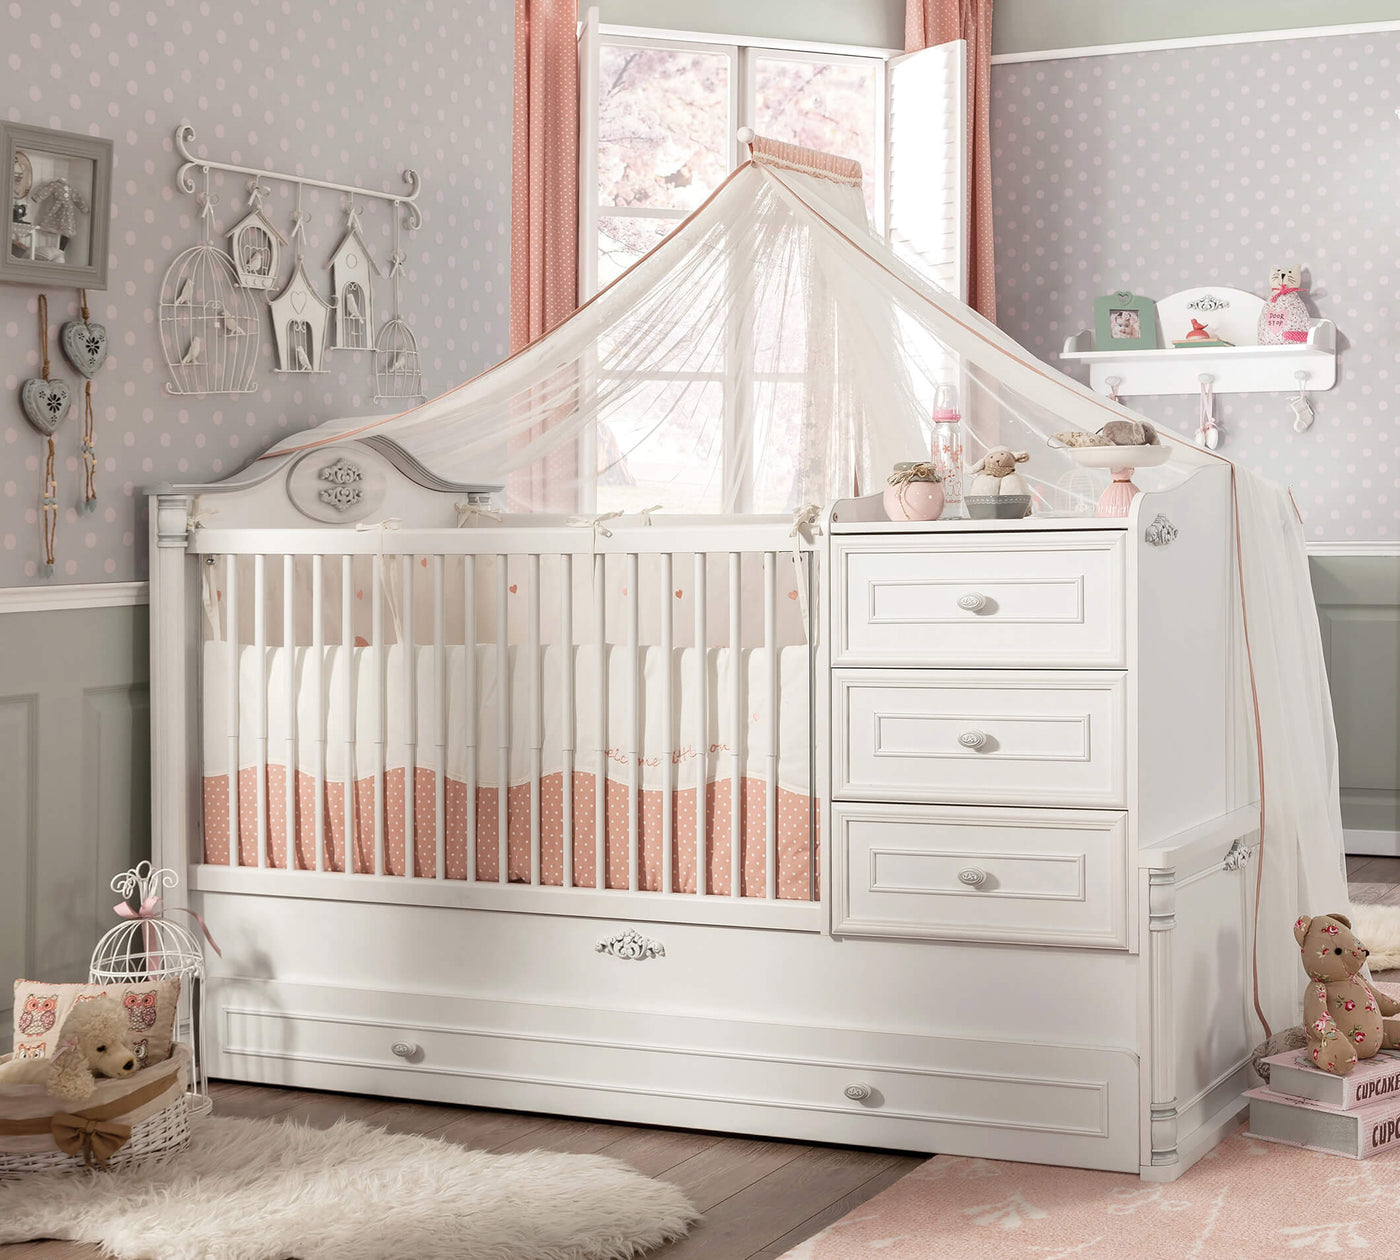 Romantic Convertible Baby Bed [With Parent Bed] [80x180 Cm]